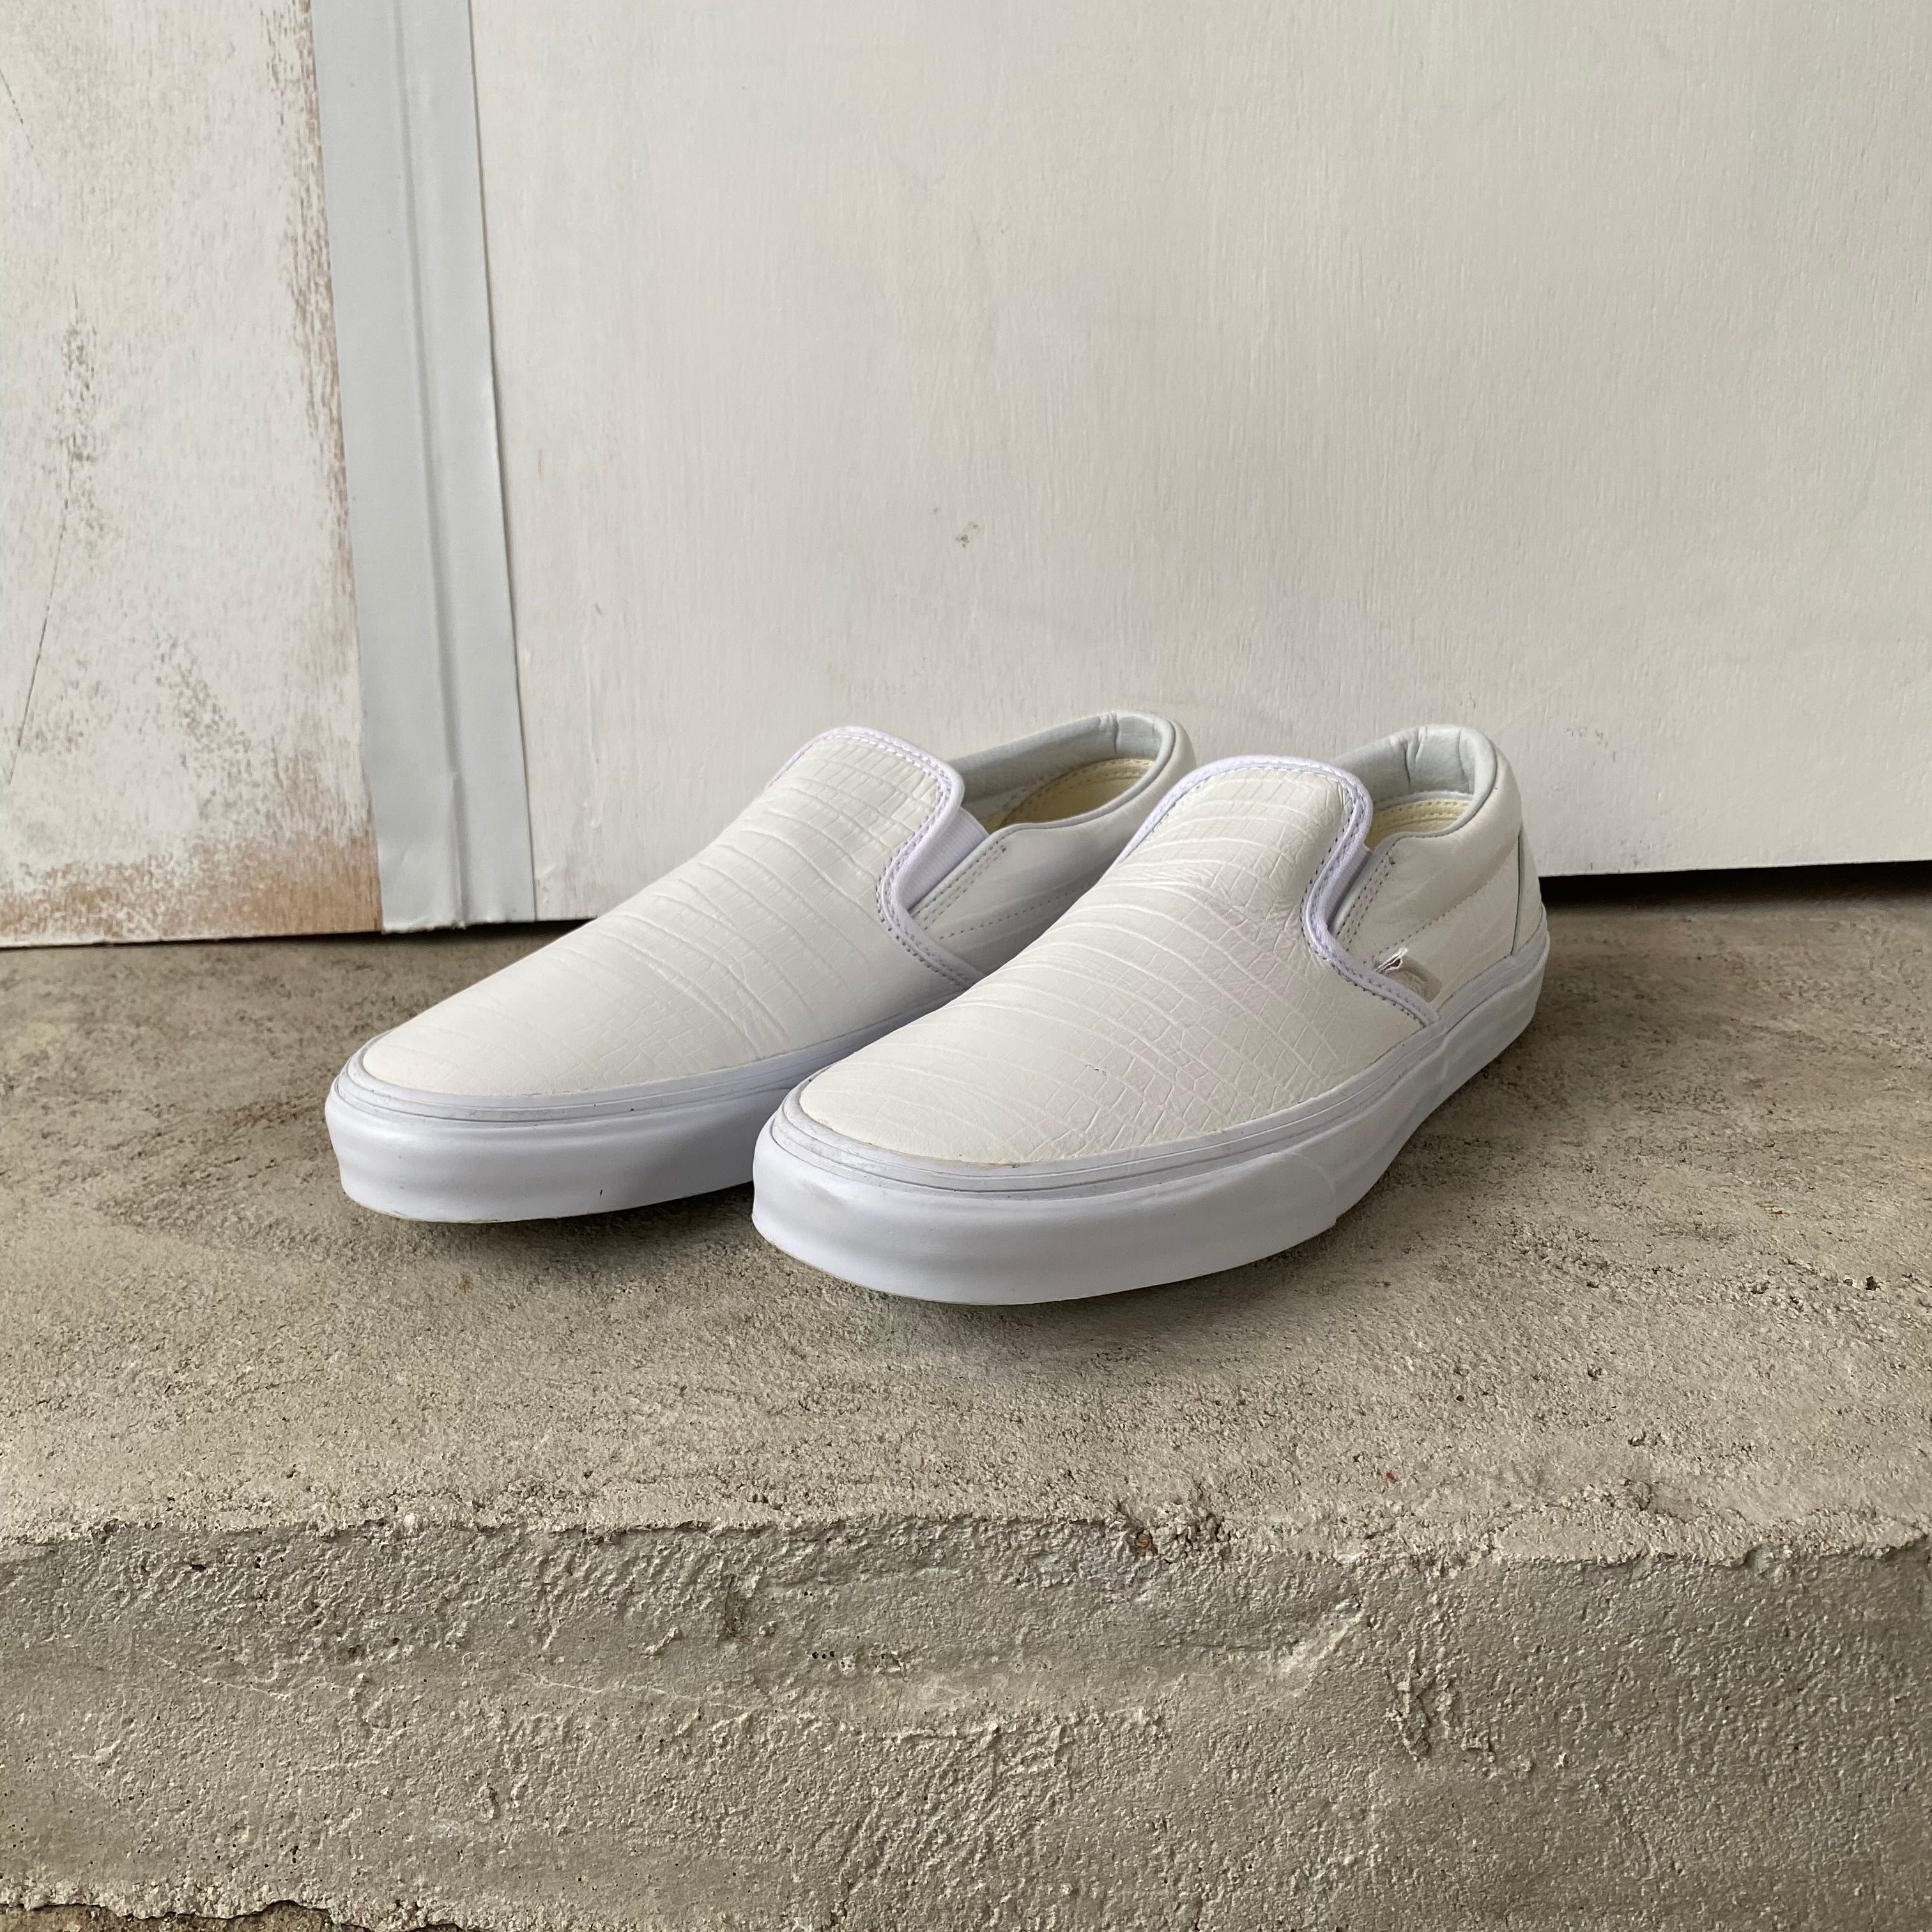 Classic Slip-On CA (Croc Leather) -VANS CALIFORNIA COLLECTION-